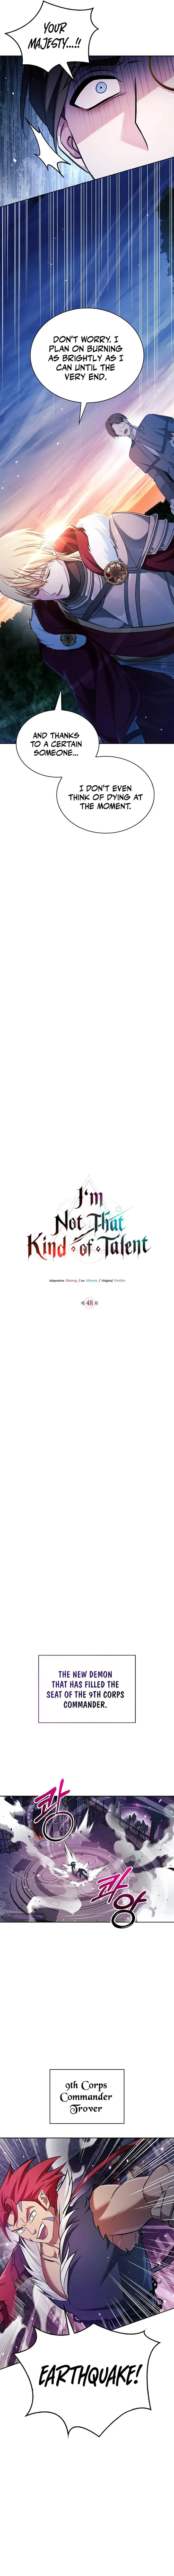 I’m Not That Kind of Talent Chapter 48 page 5